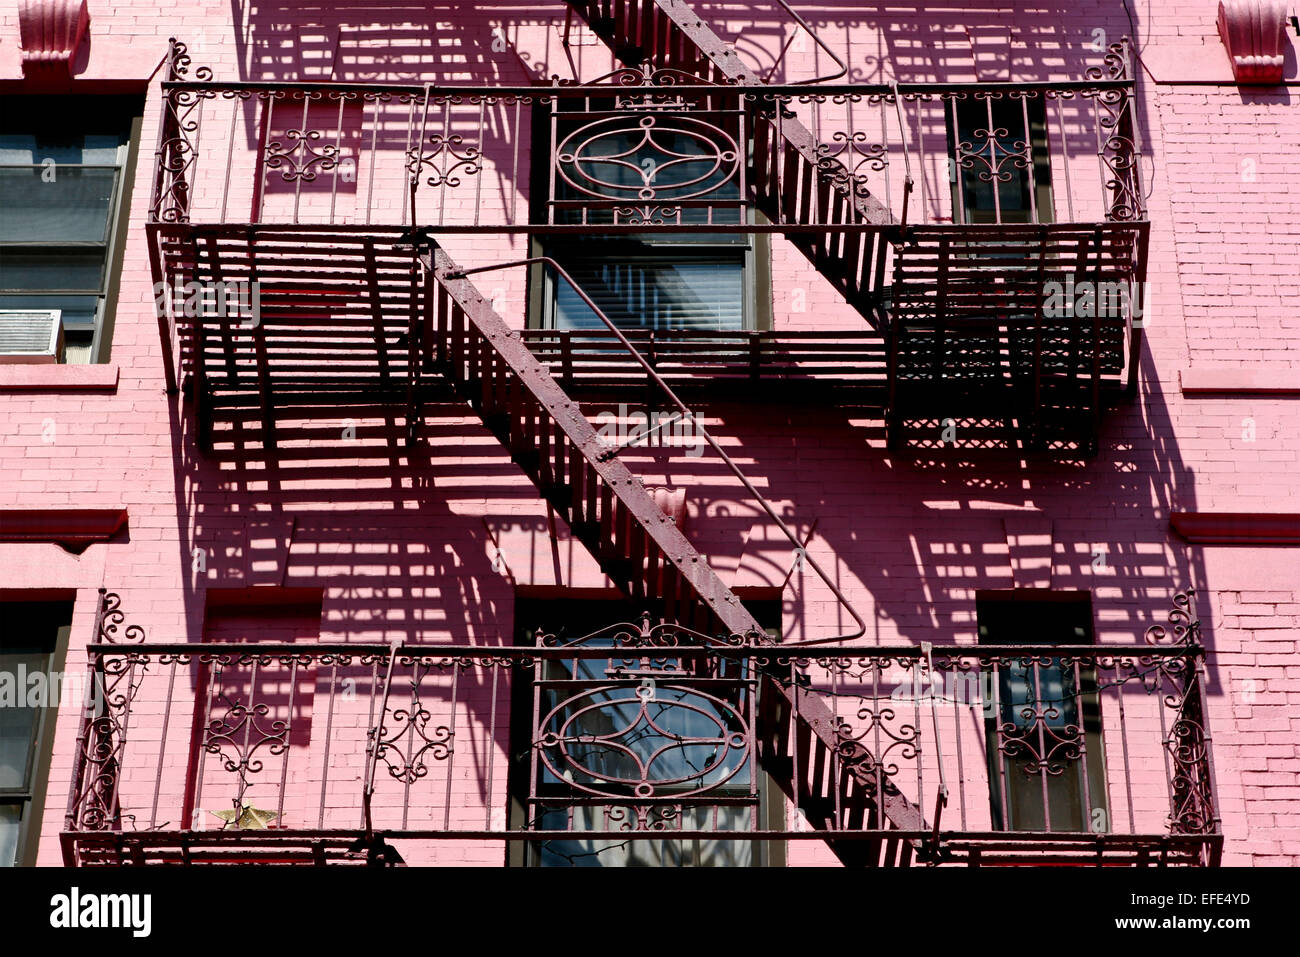 Facade of a pink building with emergency stairs with handrail, ladders fire escape. Soho, Manhattan, New York City, NY, United States of America, USA Stock Photo